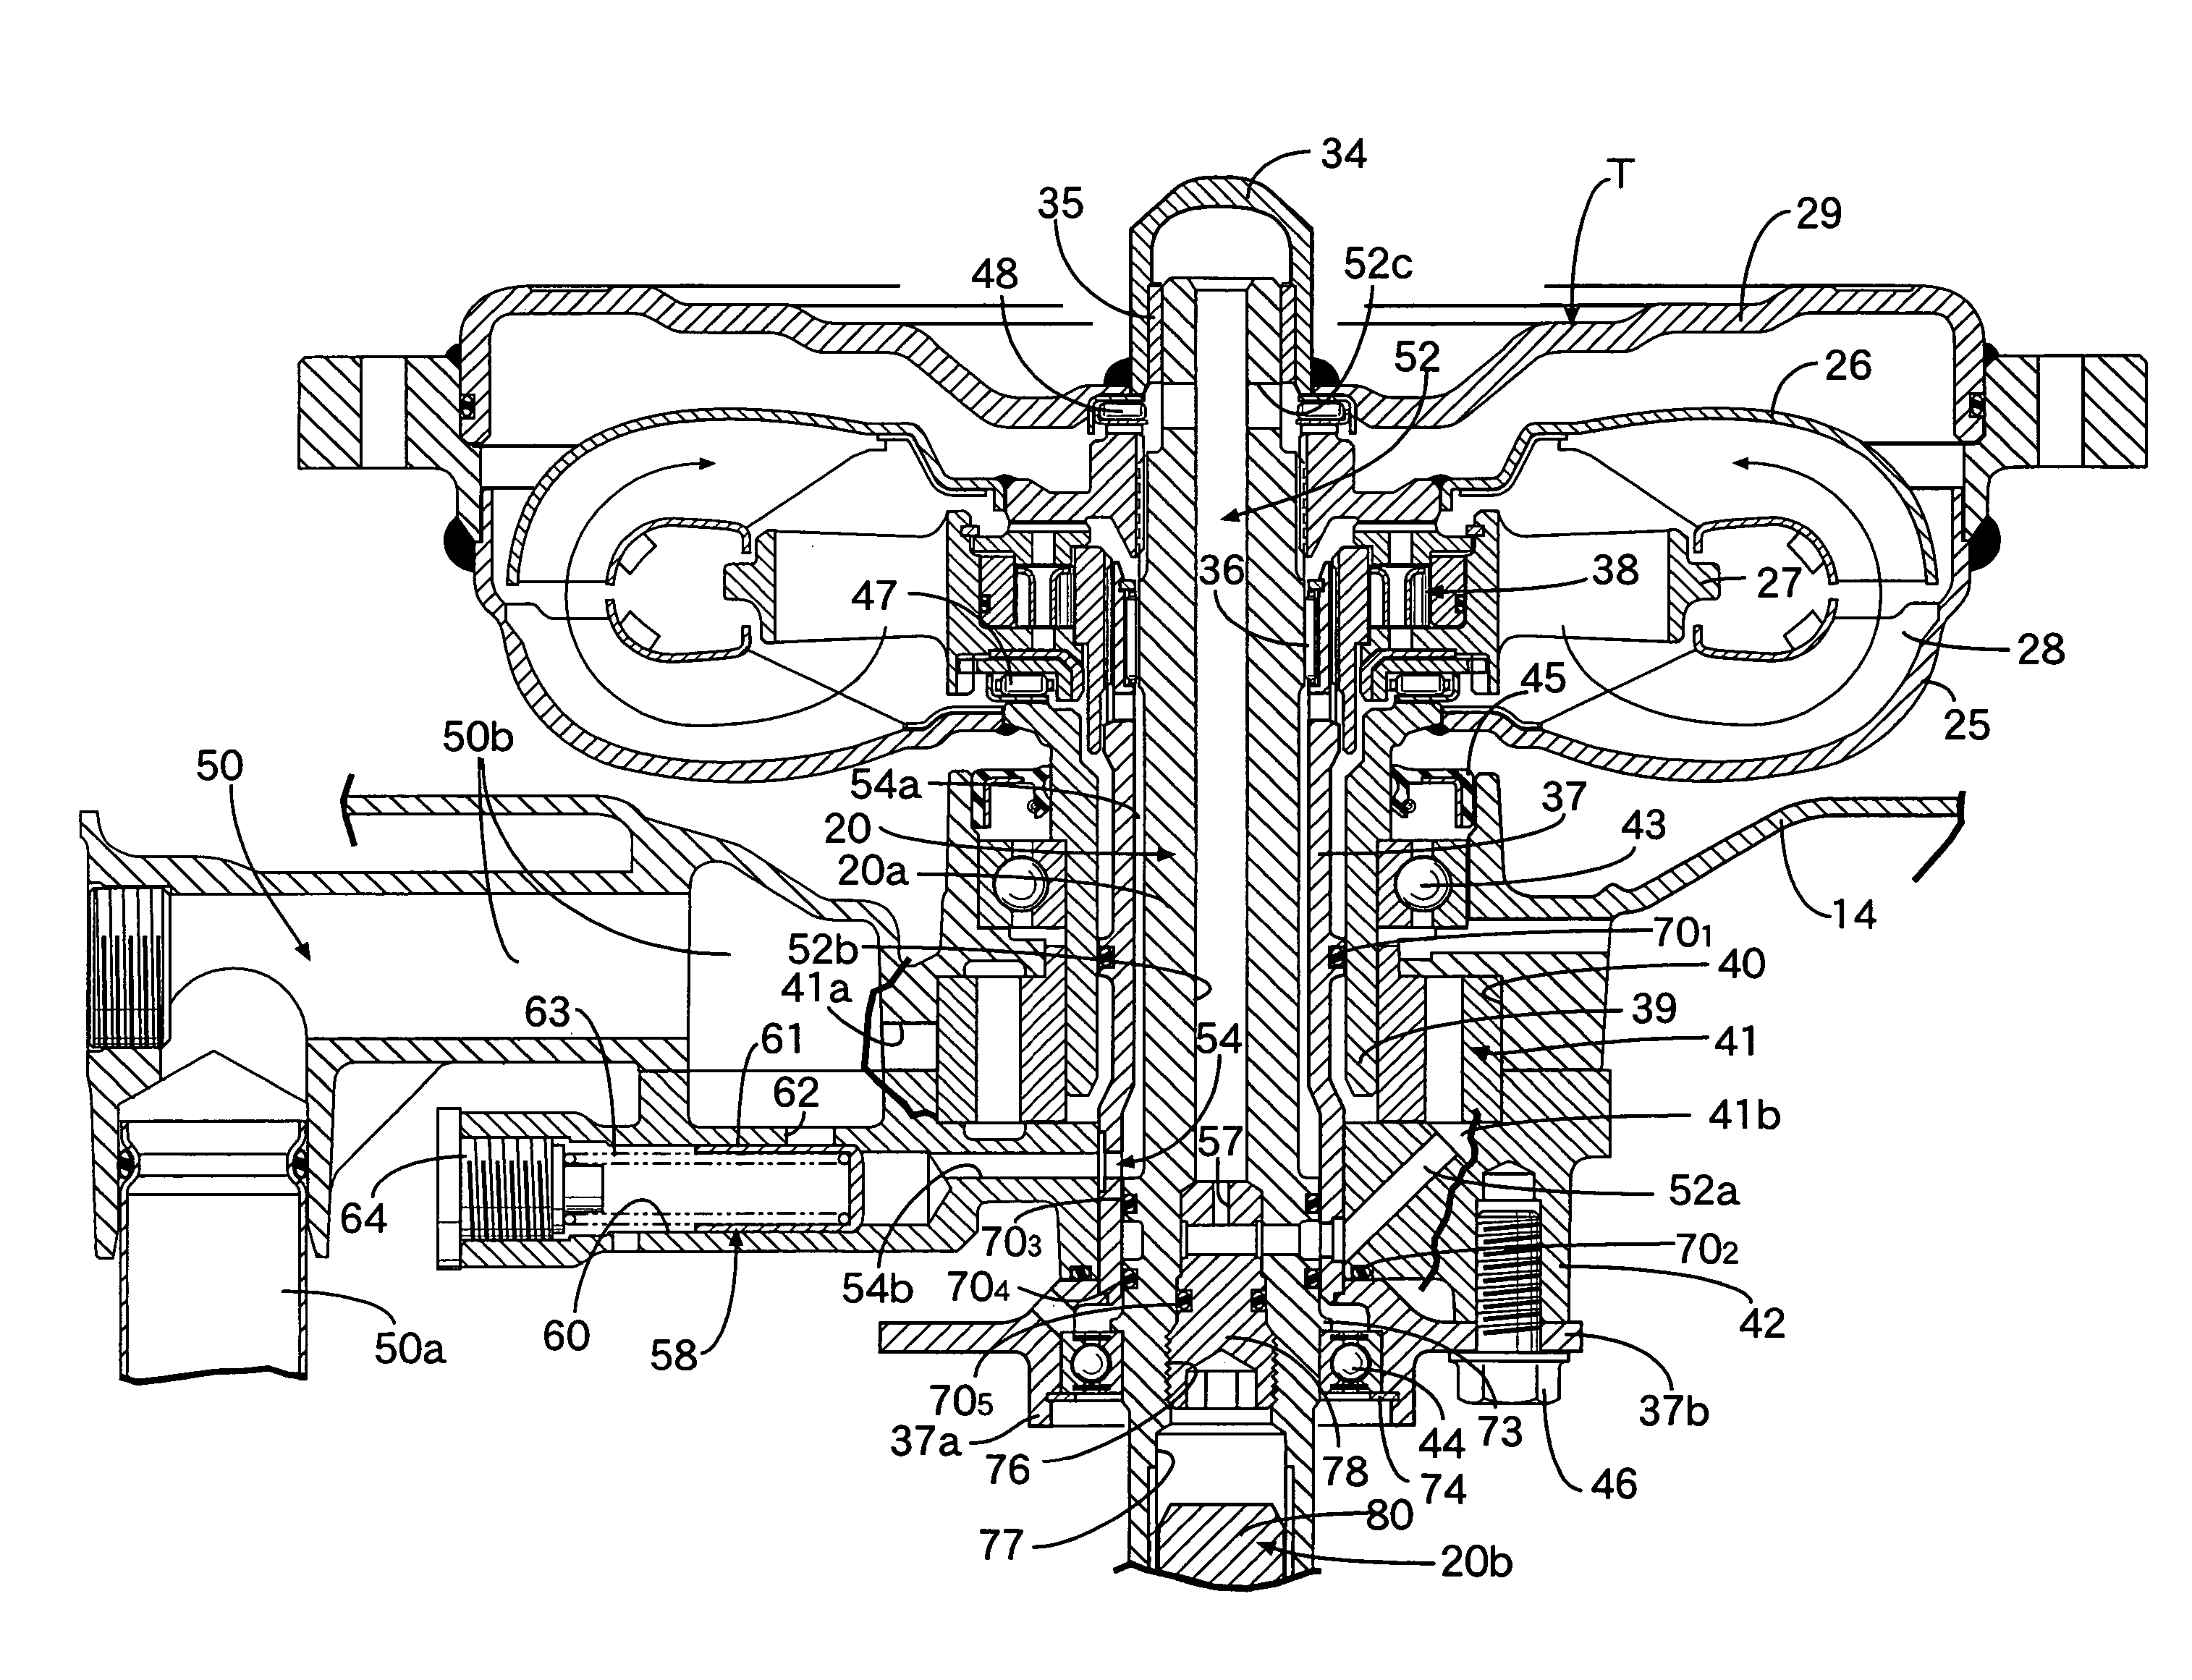 Vertical power unit and outboard engine system